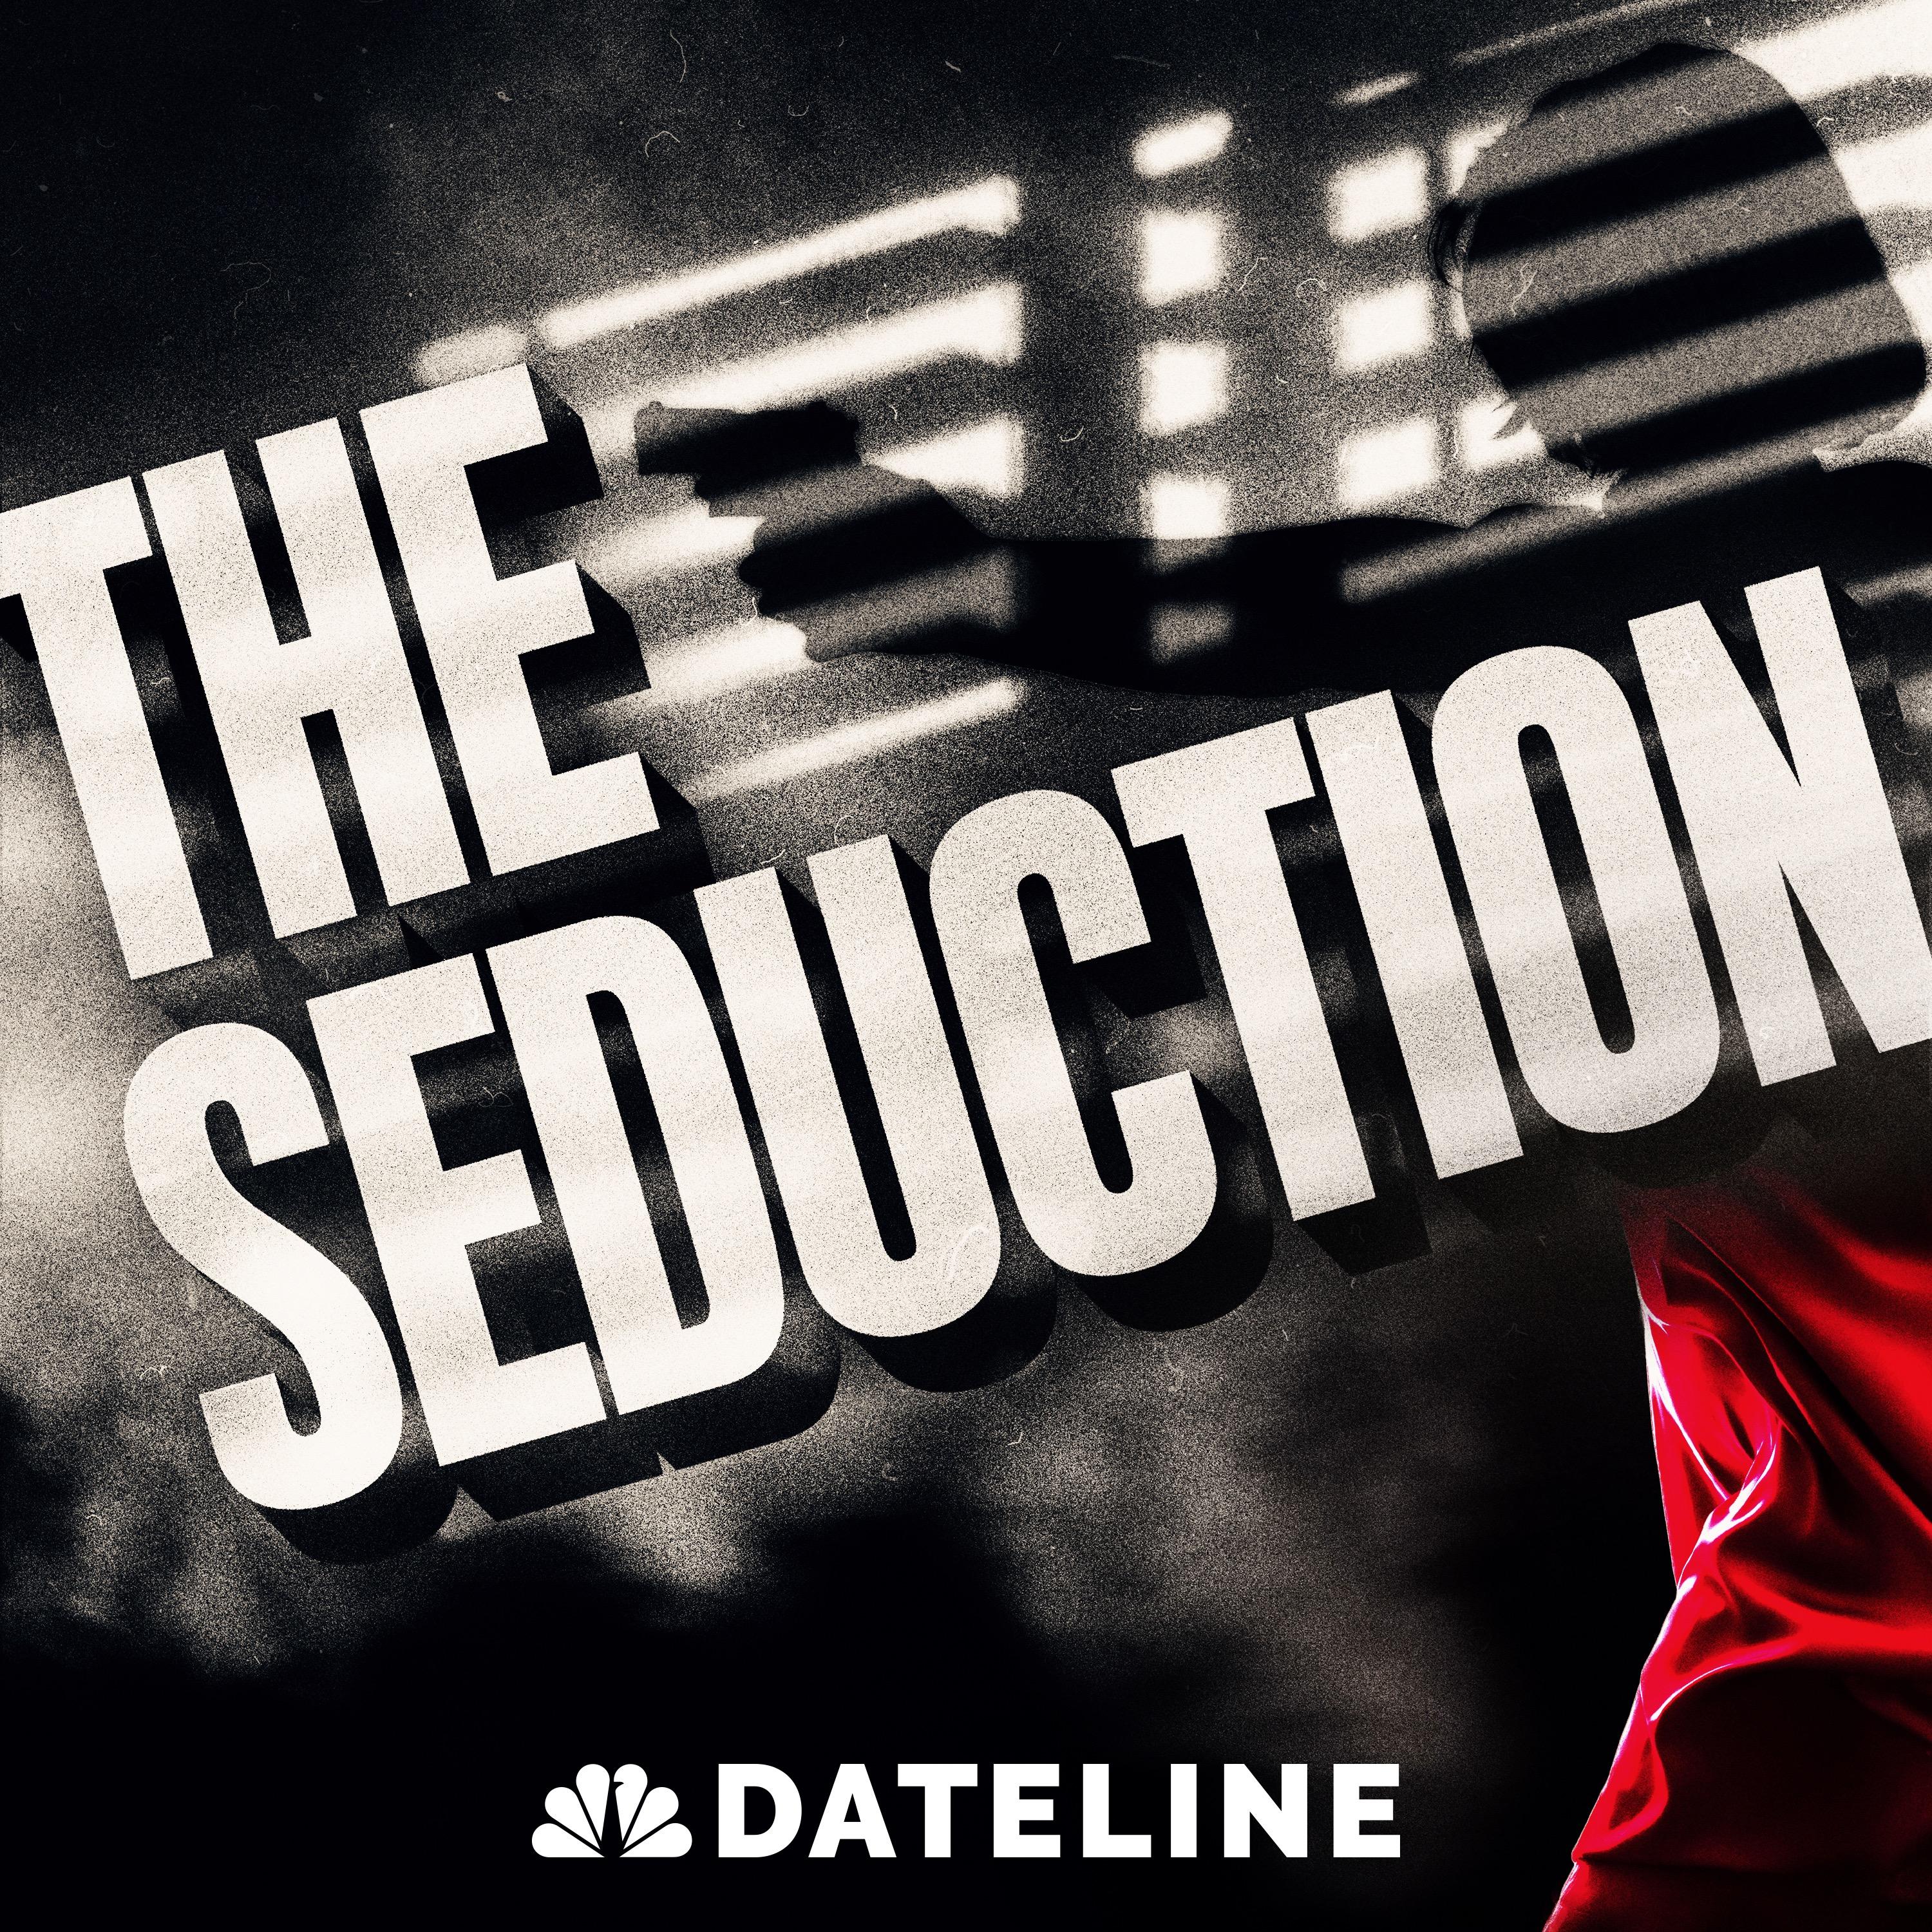 Show poster of The Seduction